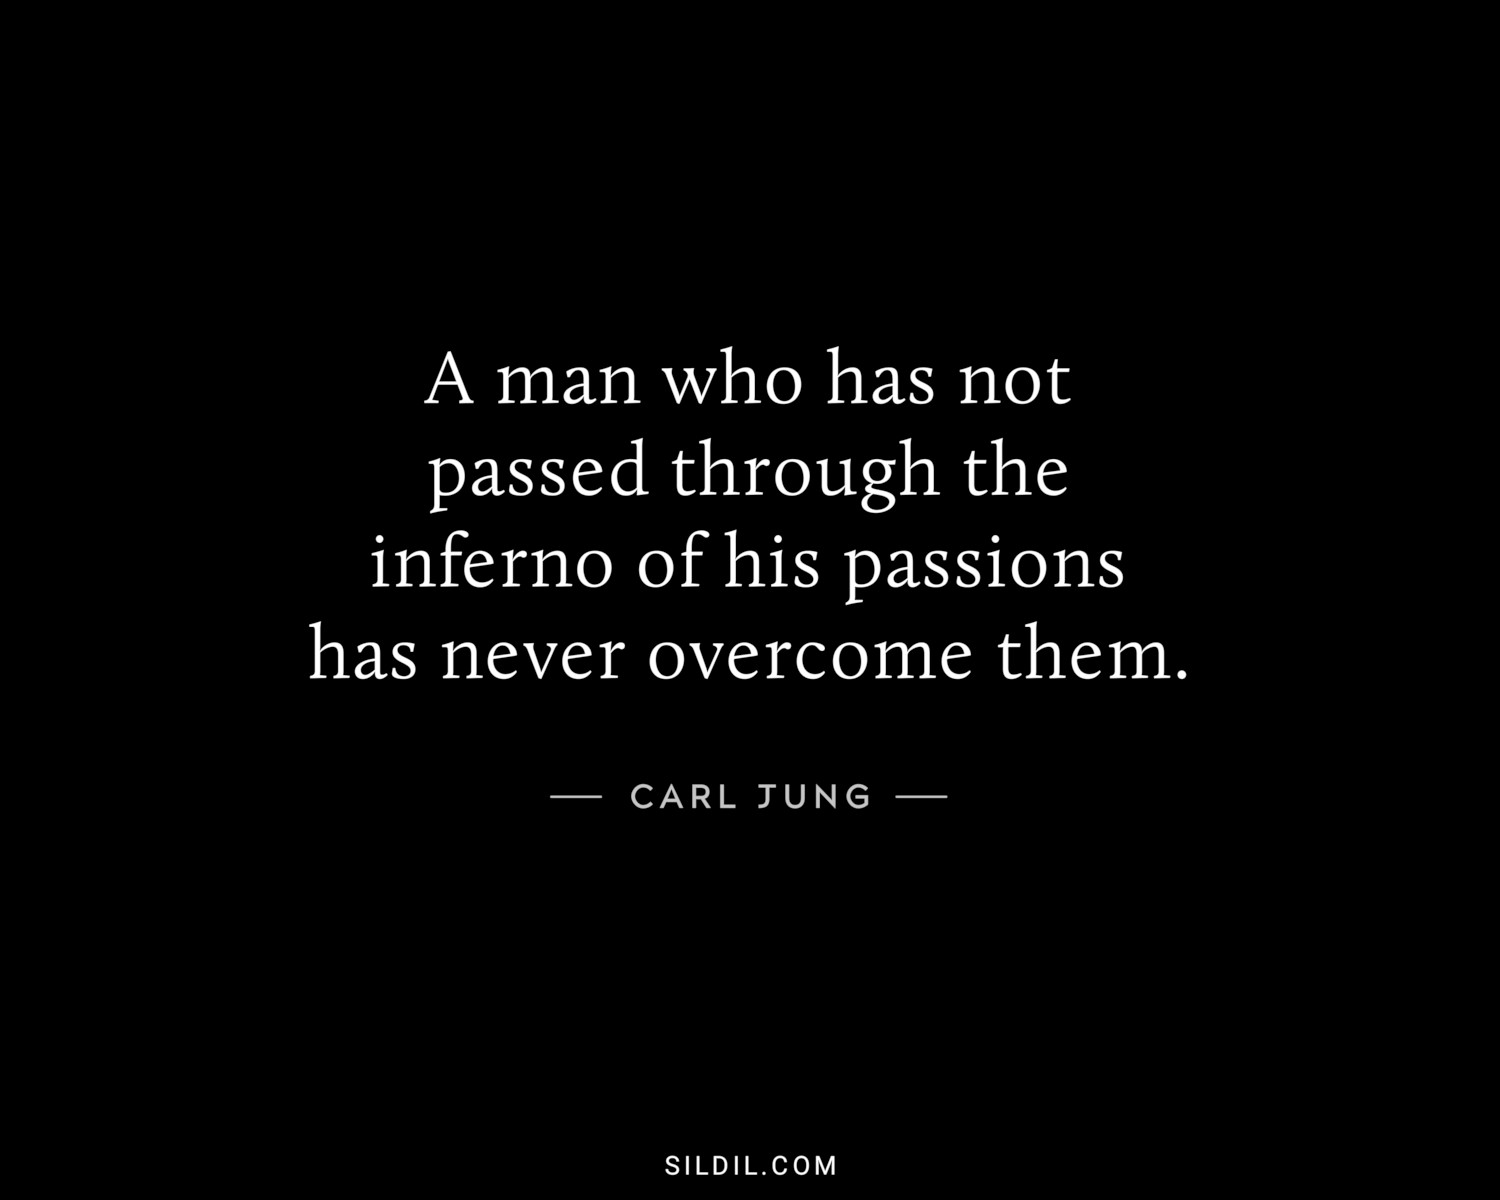 A man who has not passed through the inferno of his passions has never overcome them.